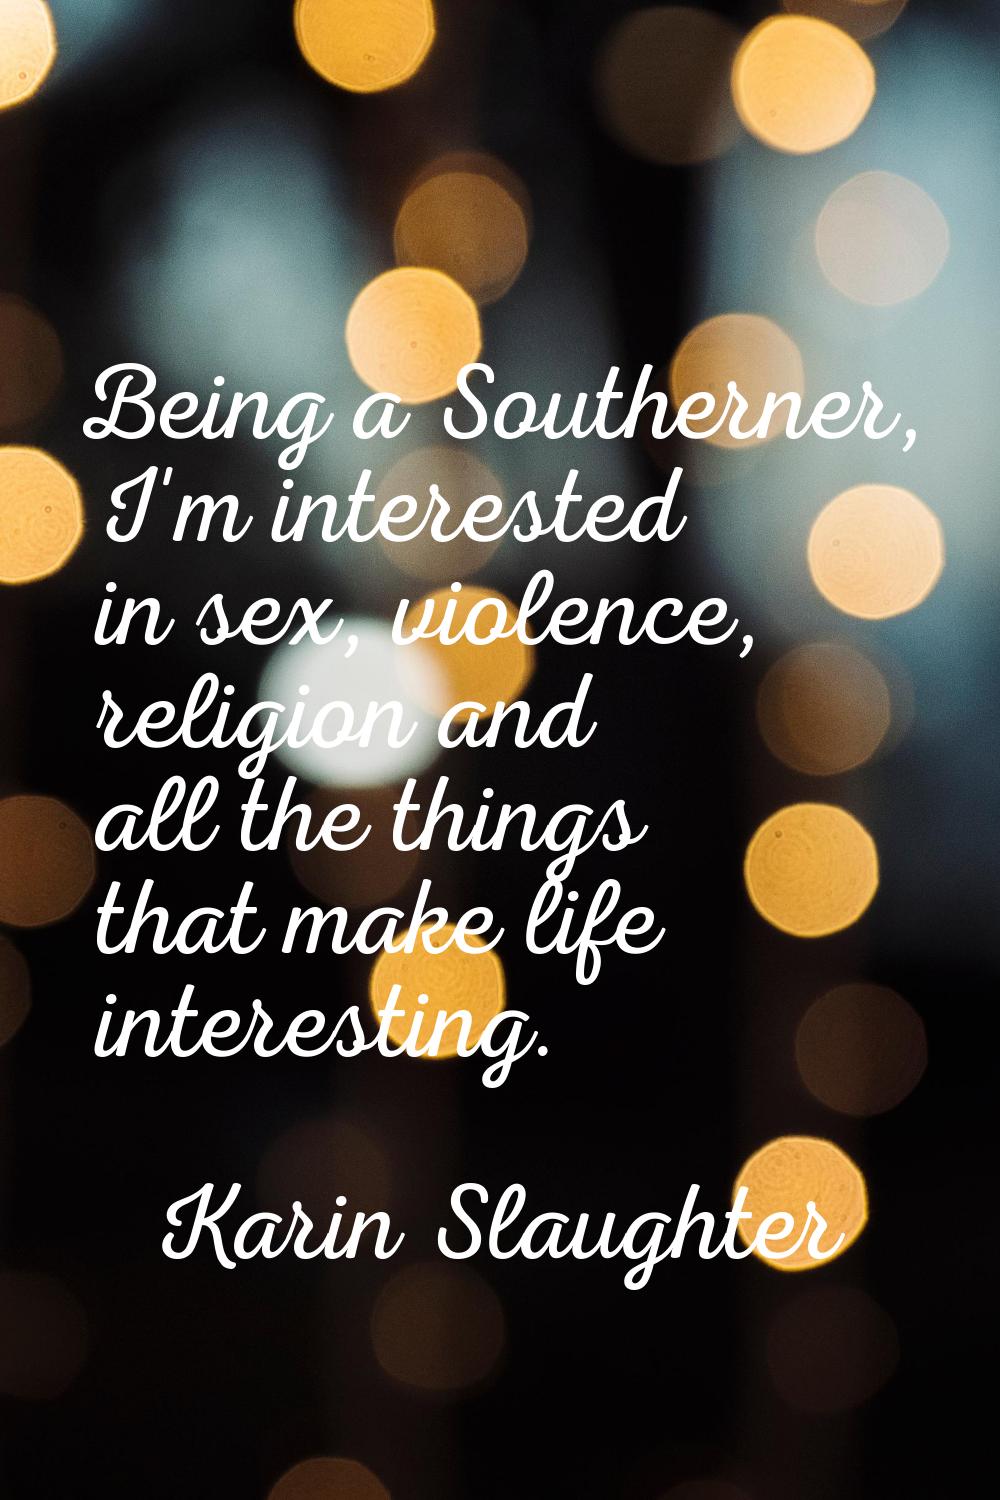 Being a Southerner, I'm interested in sex, violence, religion and all the things that make life int